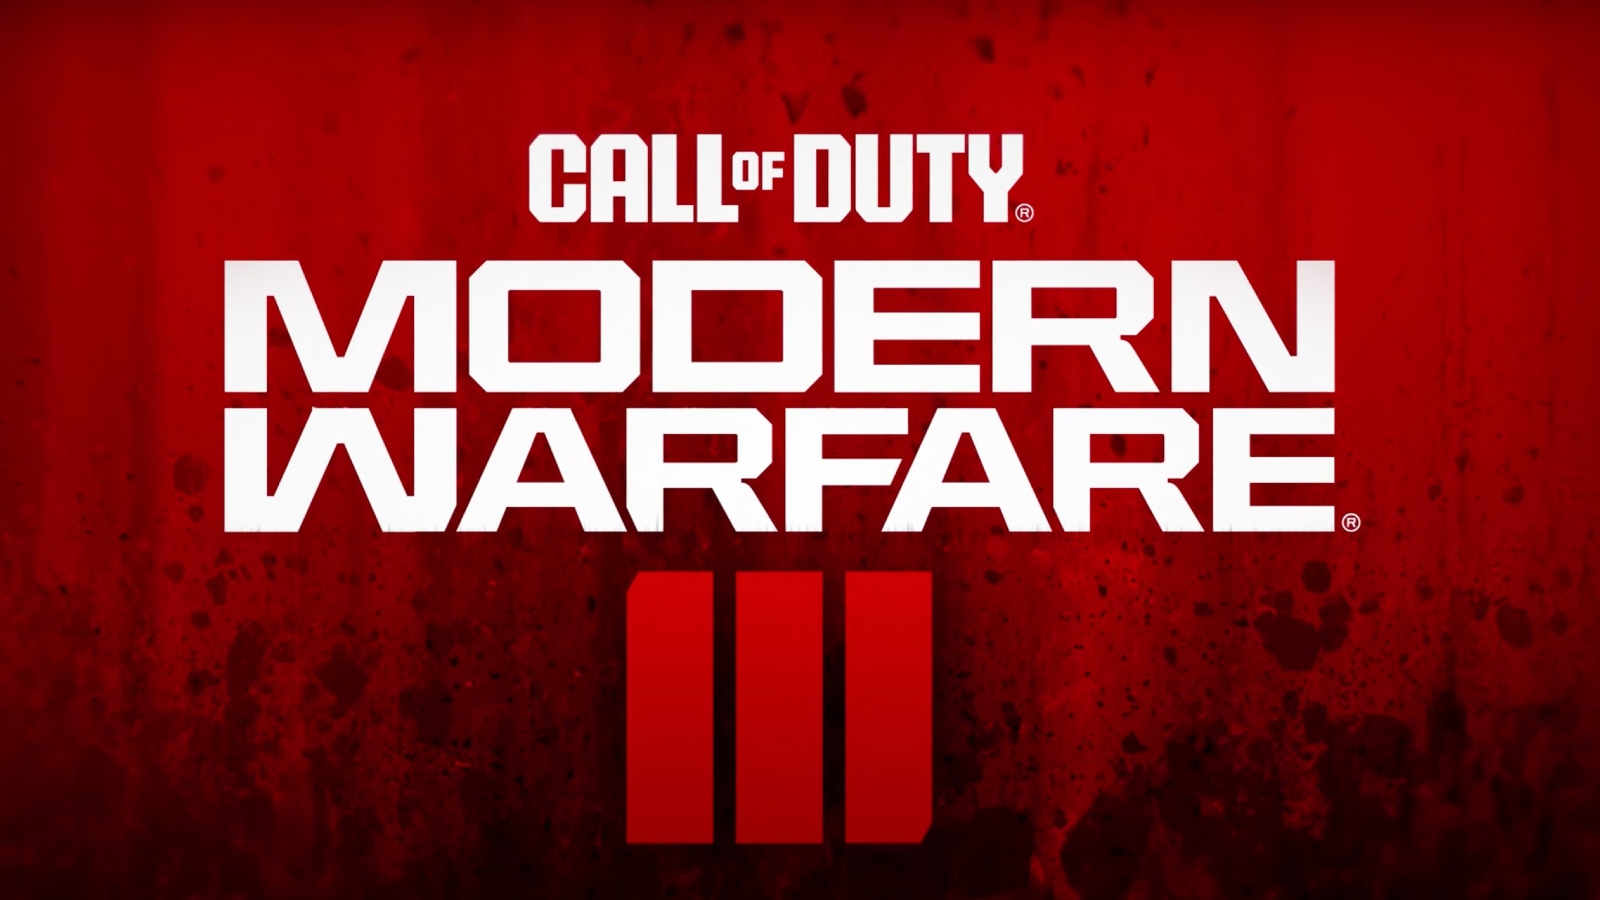 Call of Duty Modern Warfare 3 Release Date Revealed! Get Ready for an Epic Battle! 11